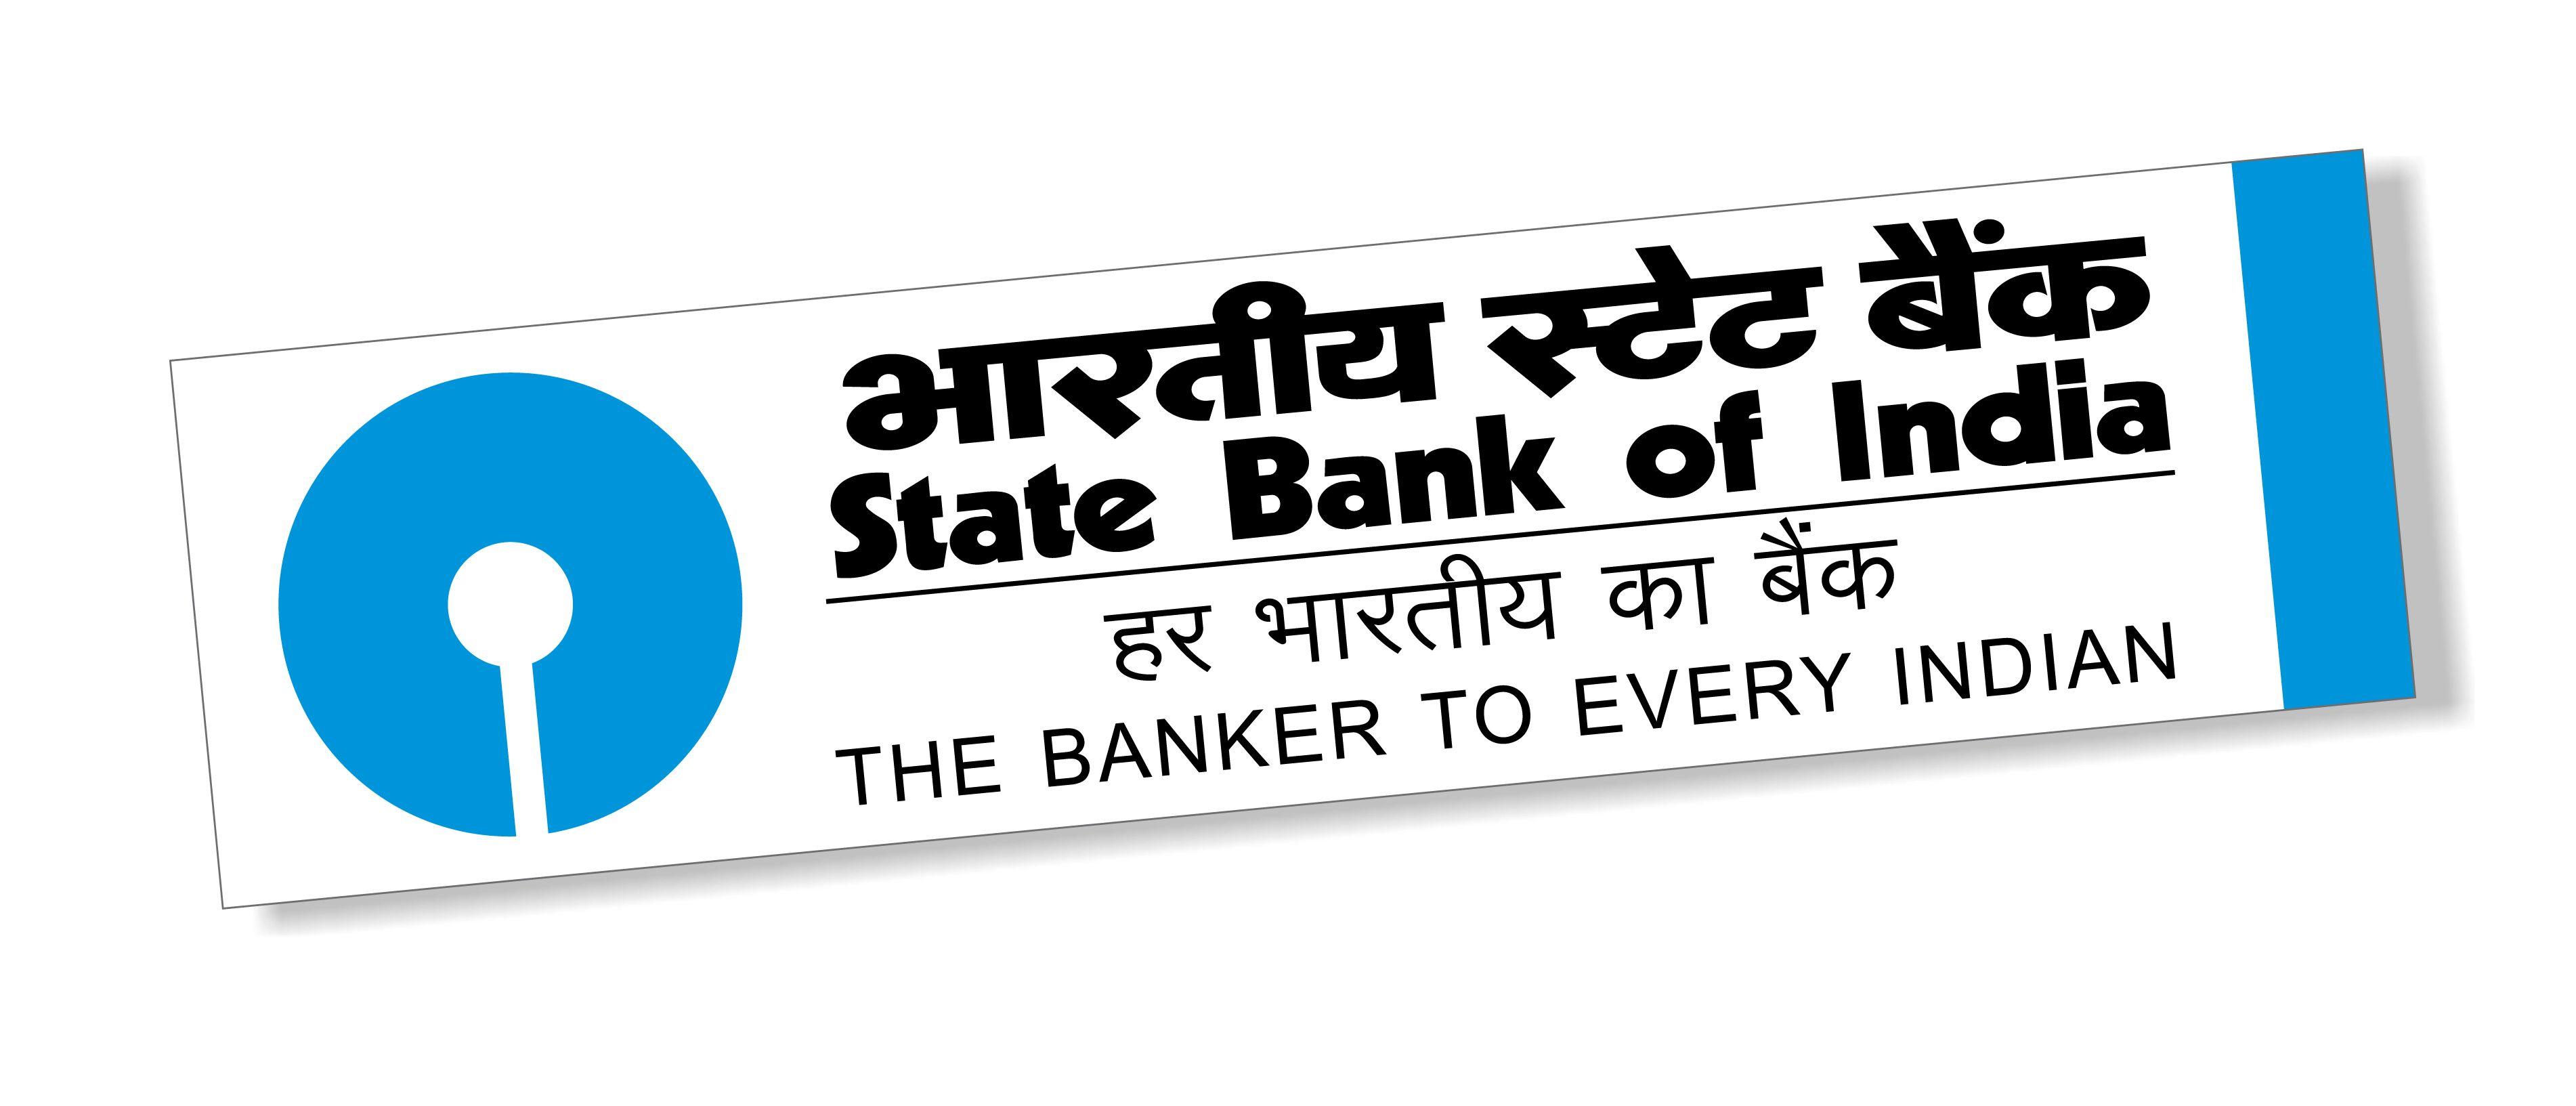 State Bank of India Logo - State Bank of India and Oracle India Collaborate on Digital Skills ...